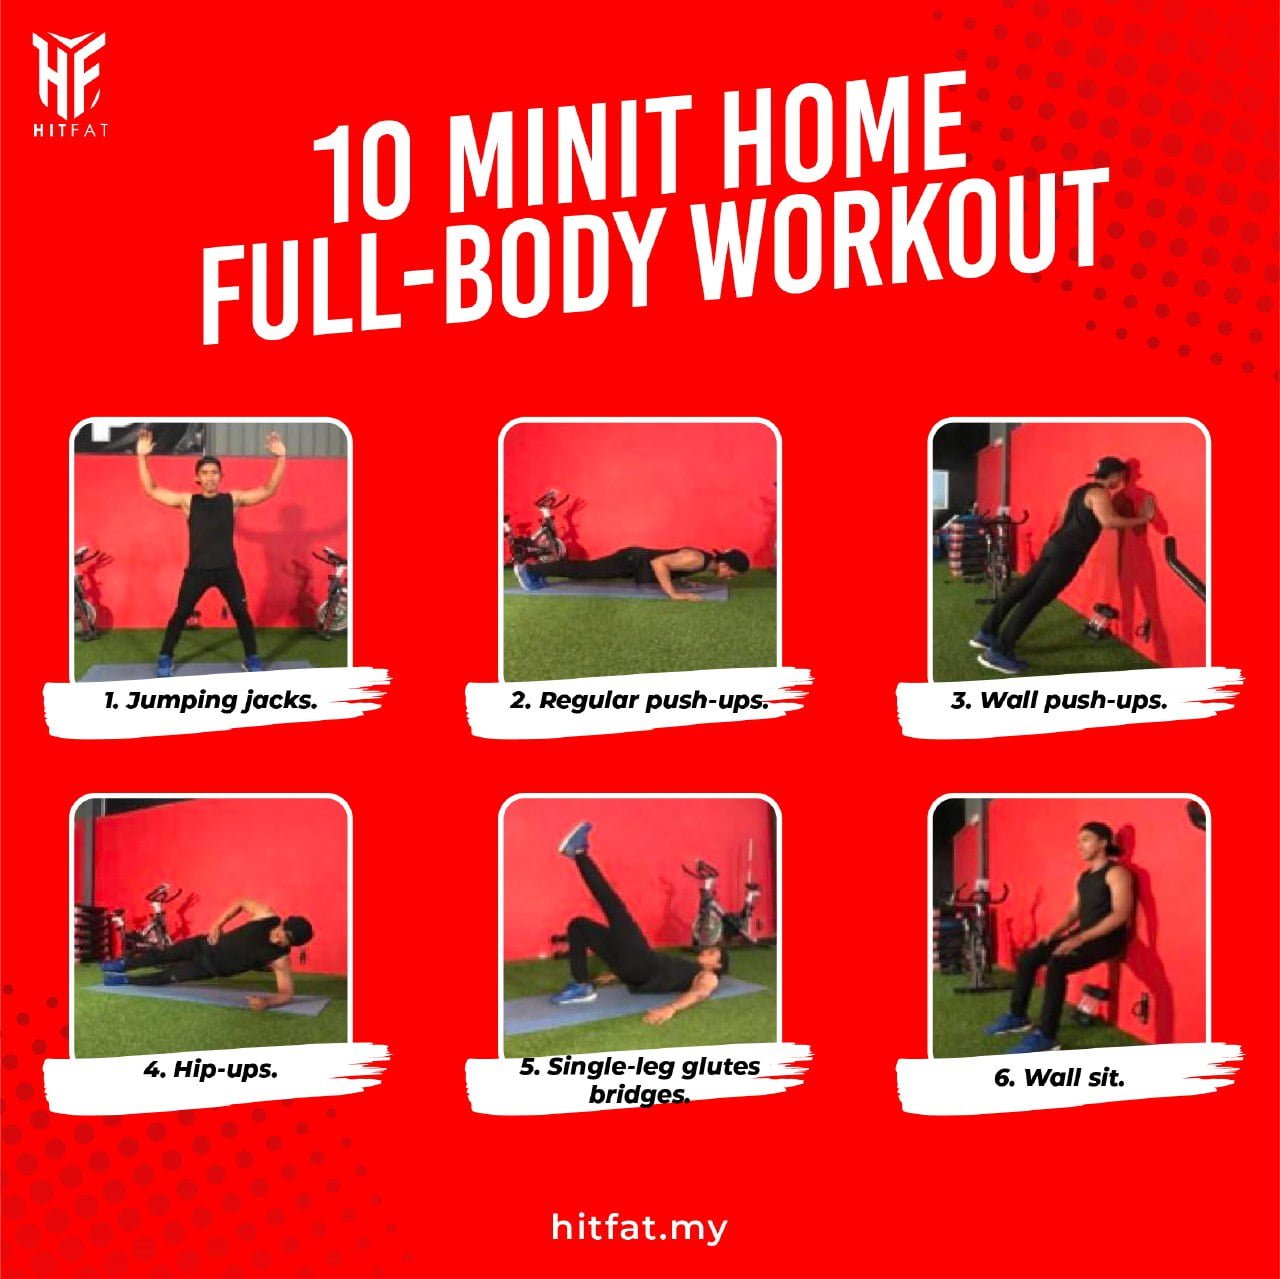 10 Minit Home Full-Body Workout